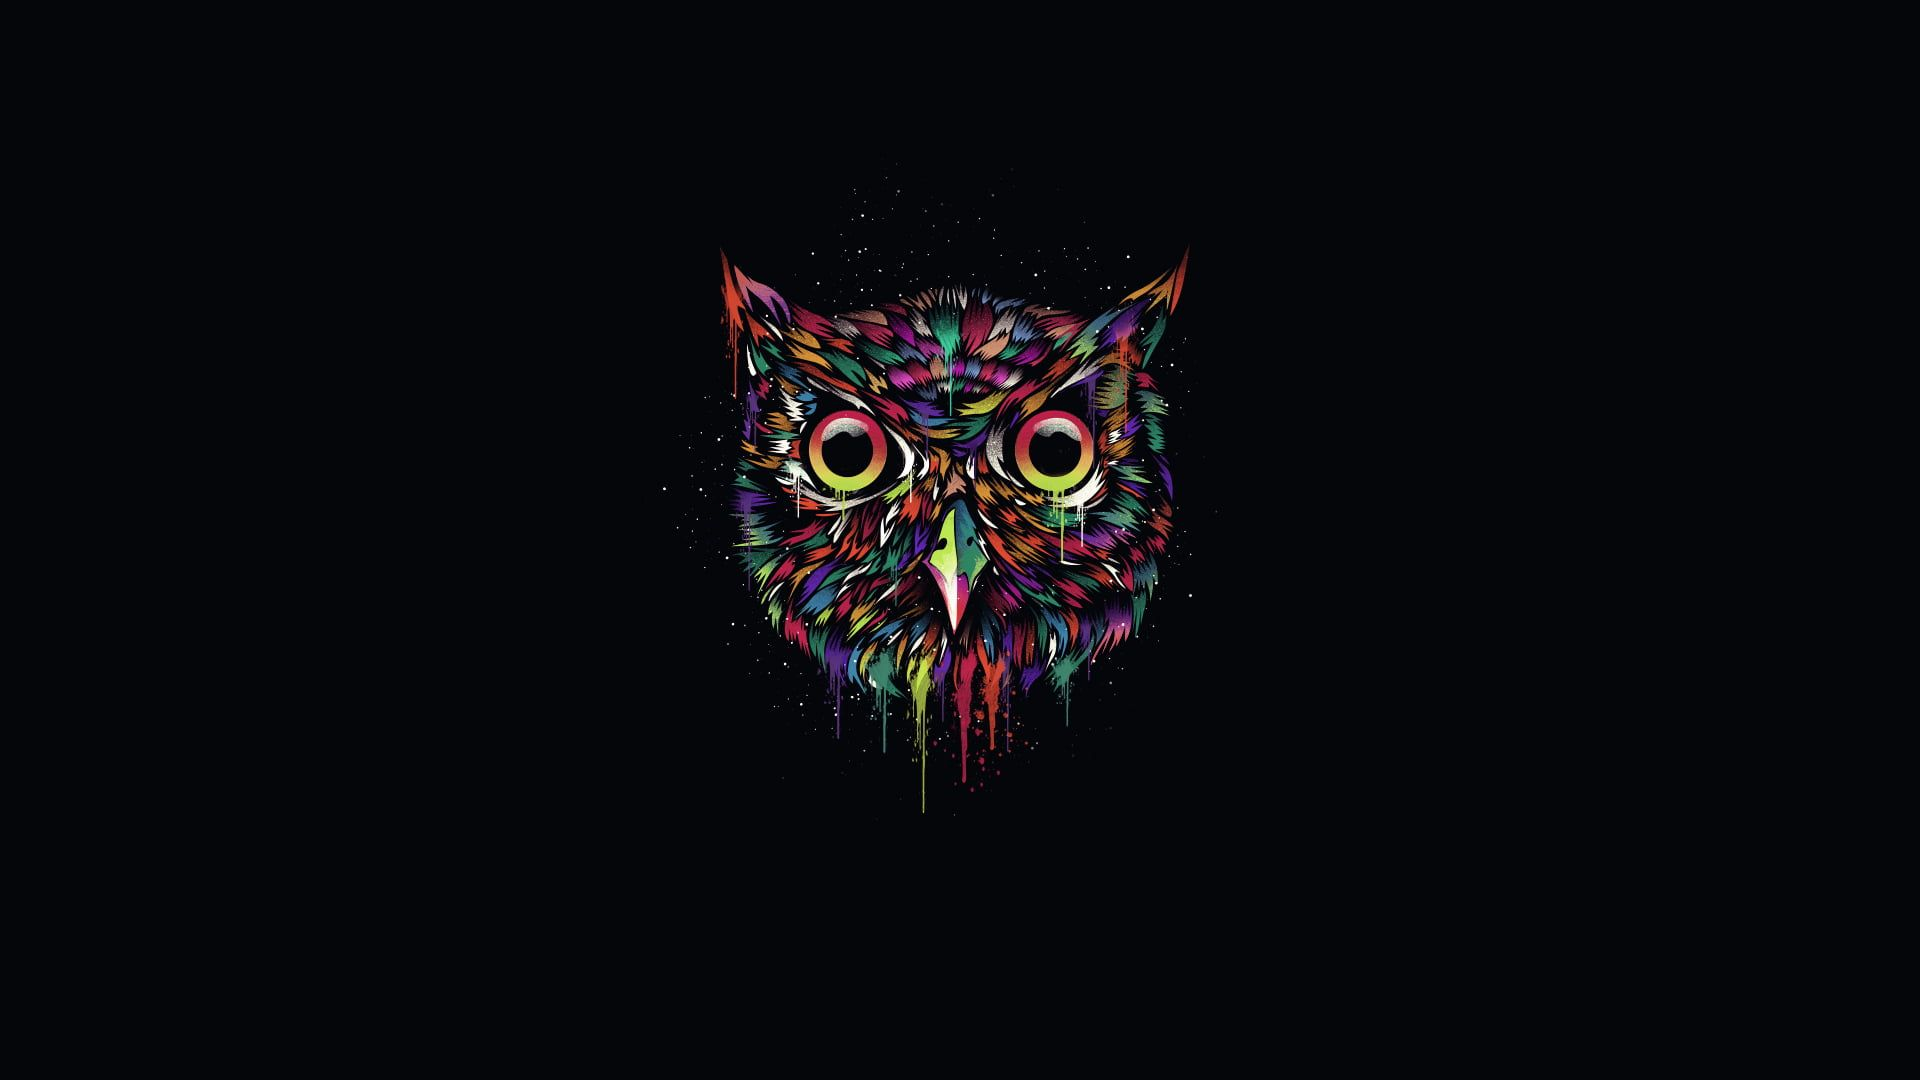 1920x1080 multicolored owl illustration the dark background #owl #paint #minimalism # owl #1080P #wallpaper #hdwall&acirc;&#128;&brvbar; | Owl wallpaper, Black background wallpaper, Colorful owls